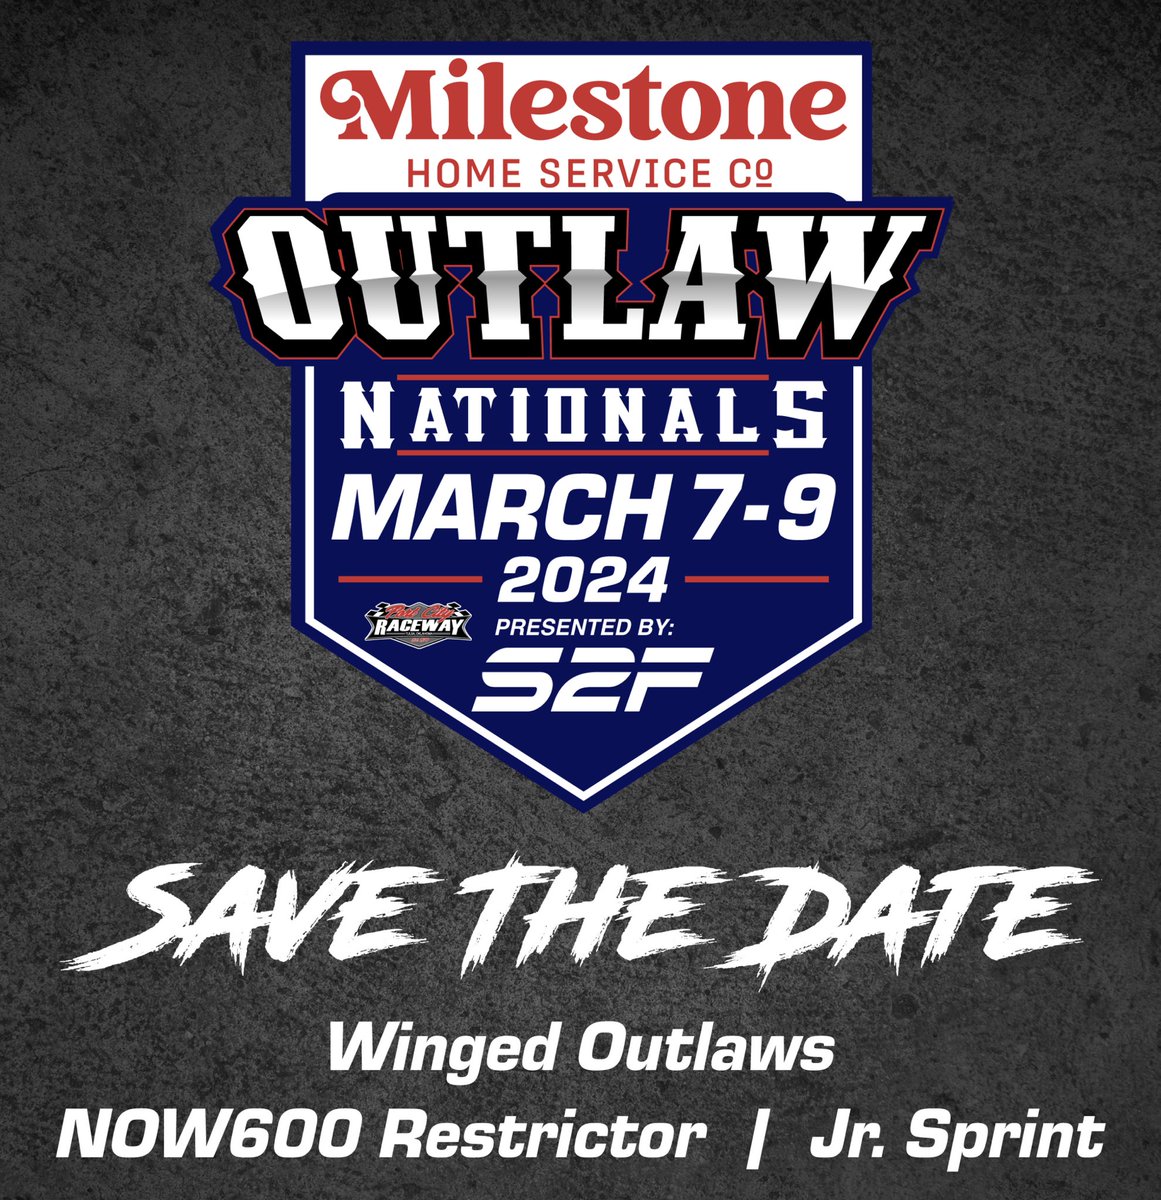 The 2024 Milestone Home Services Outlaw Nationals presented by Start2Finish is set for Port City Raceway on March 7-9! It will once again be a marquee event for Winged Outlaws, NOW600 Restrictors, and Jr. Sprints. More event information can be found at: portcityraceway.net/press/article/…